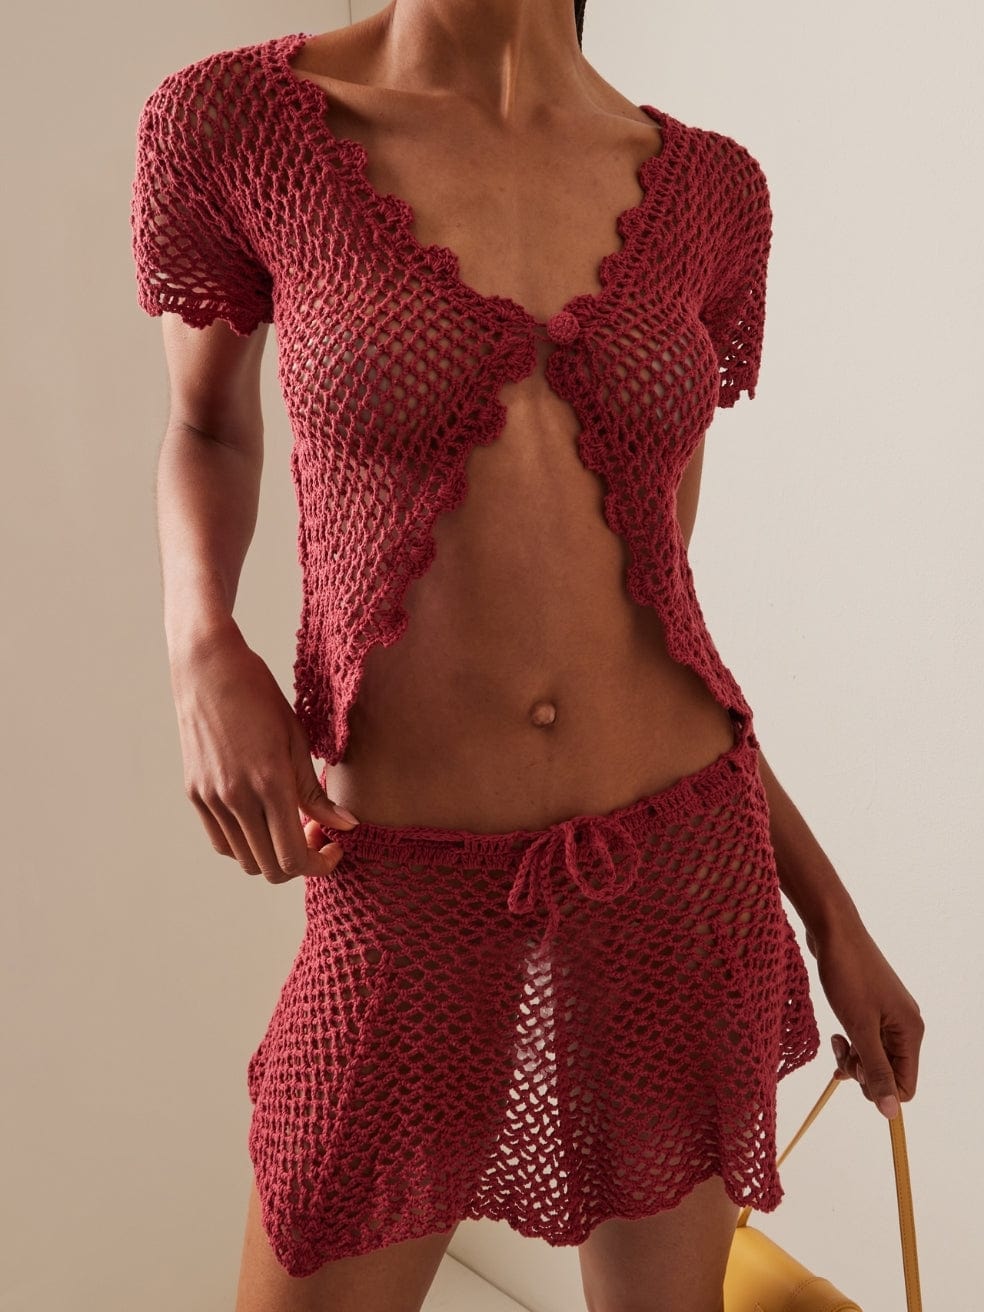 Gaia Crocheted Top And Skirt Set